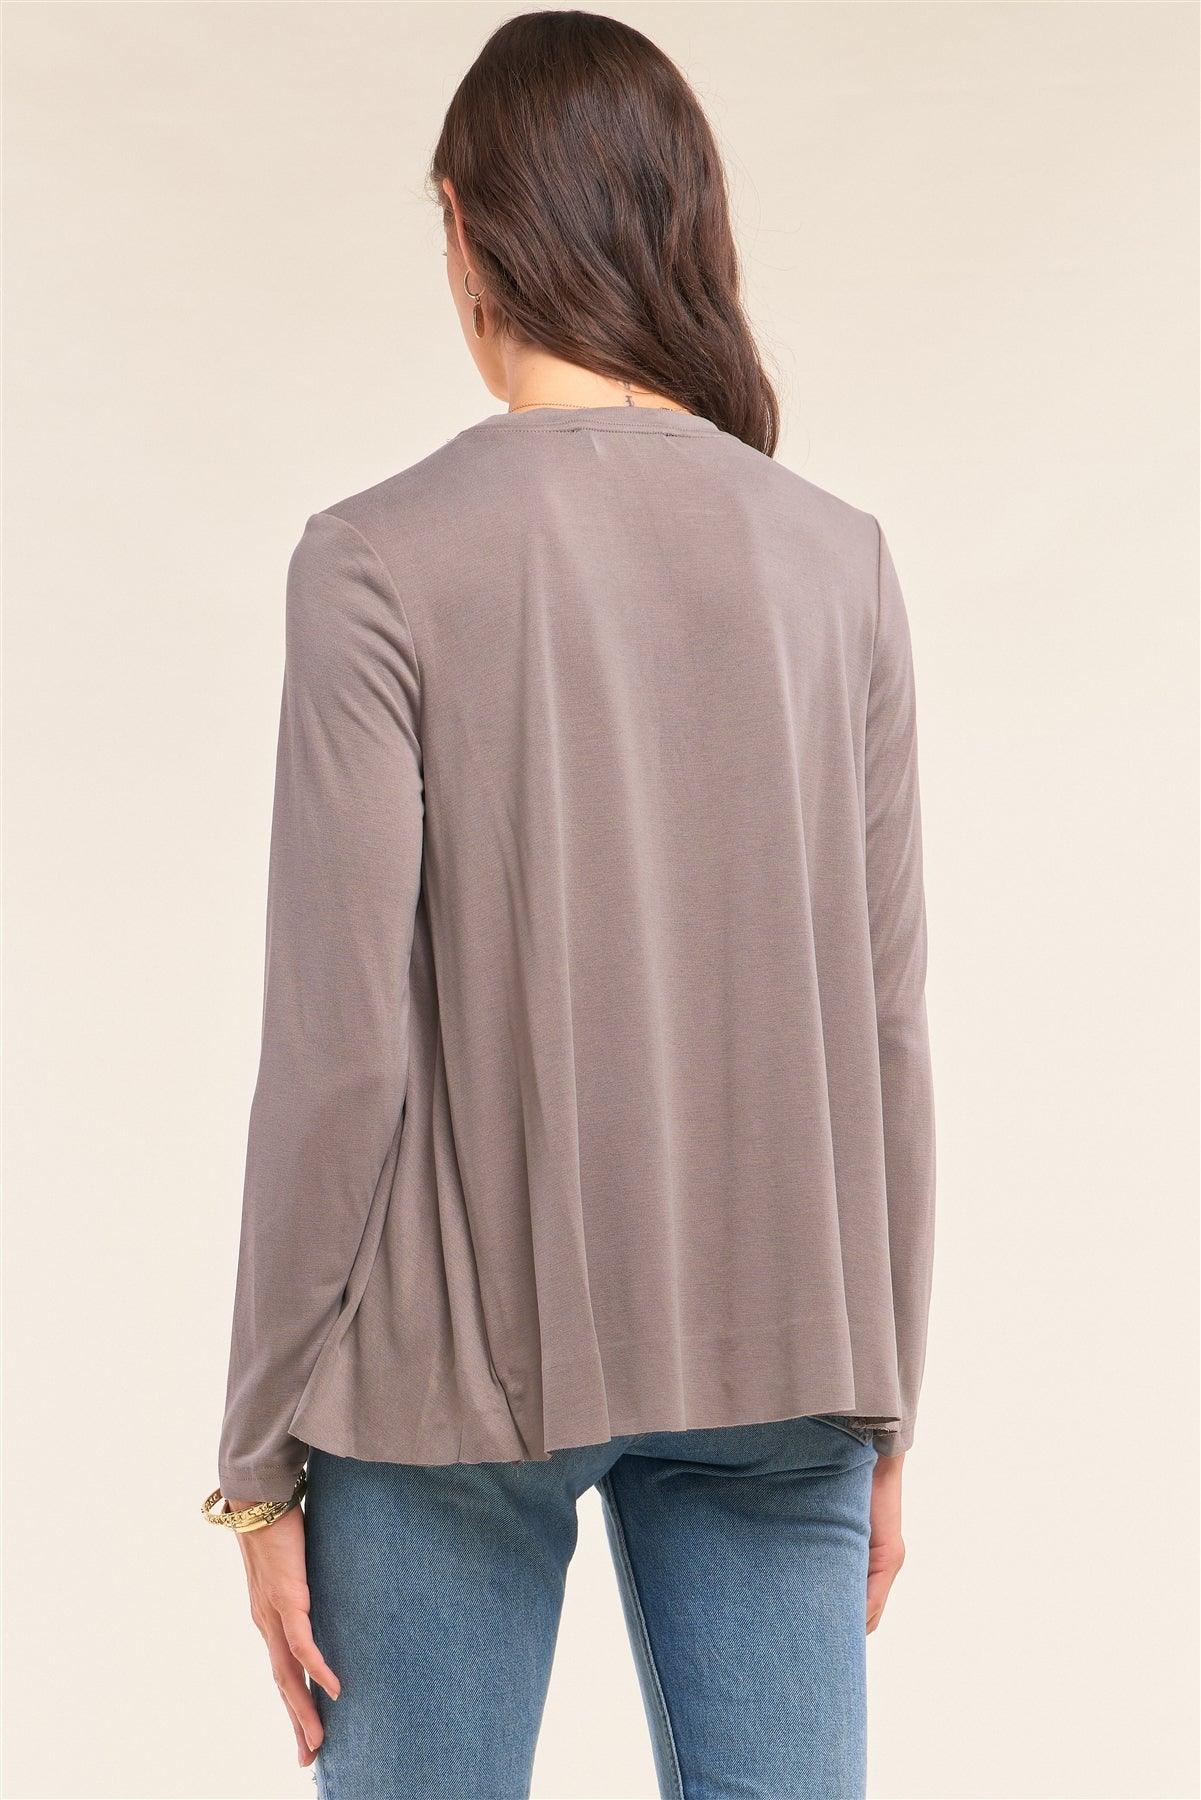 Stone Grey Loose Fit Long Sleeve Crew Neck Wrap Front Raw Hem Detail Top /1-2-2-1